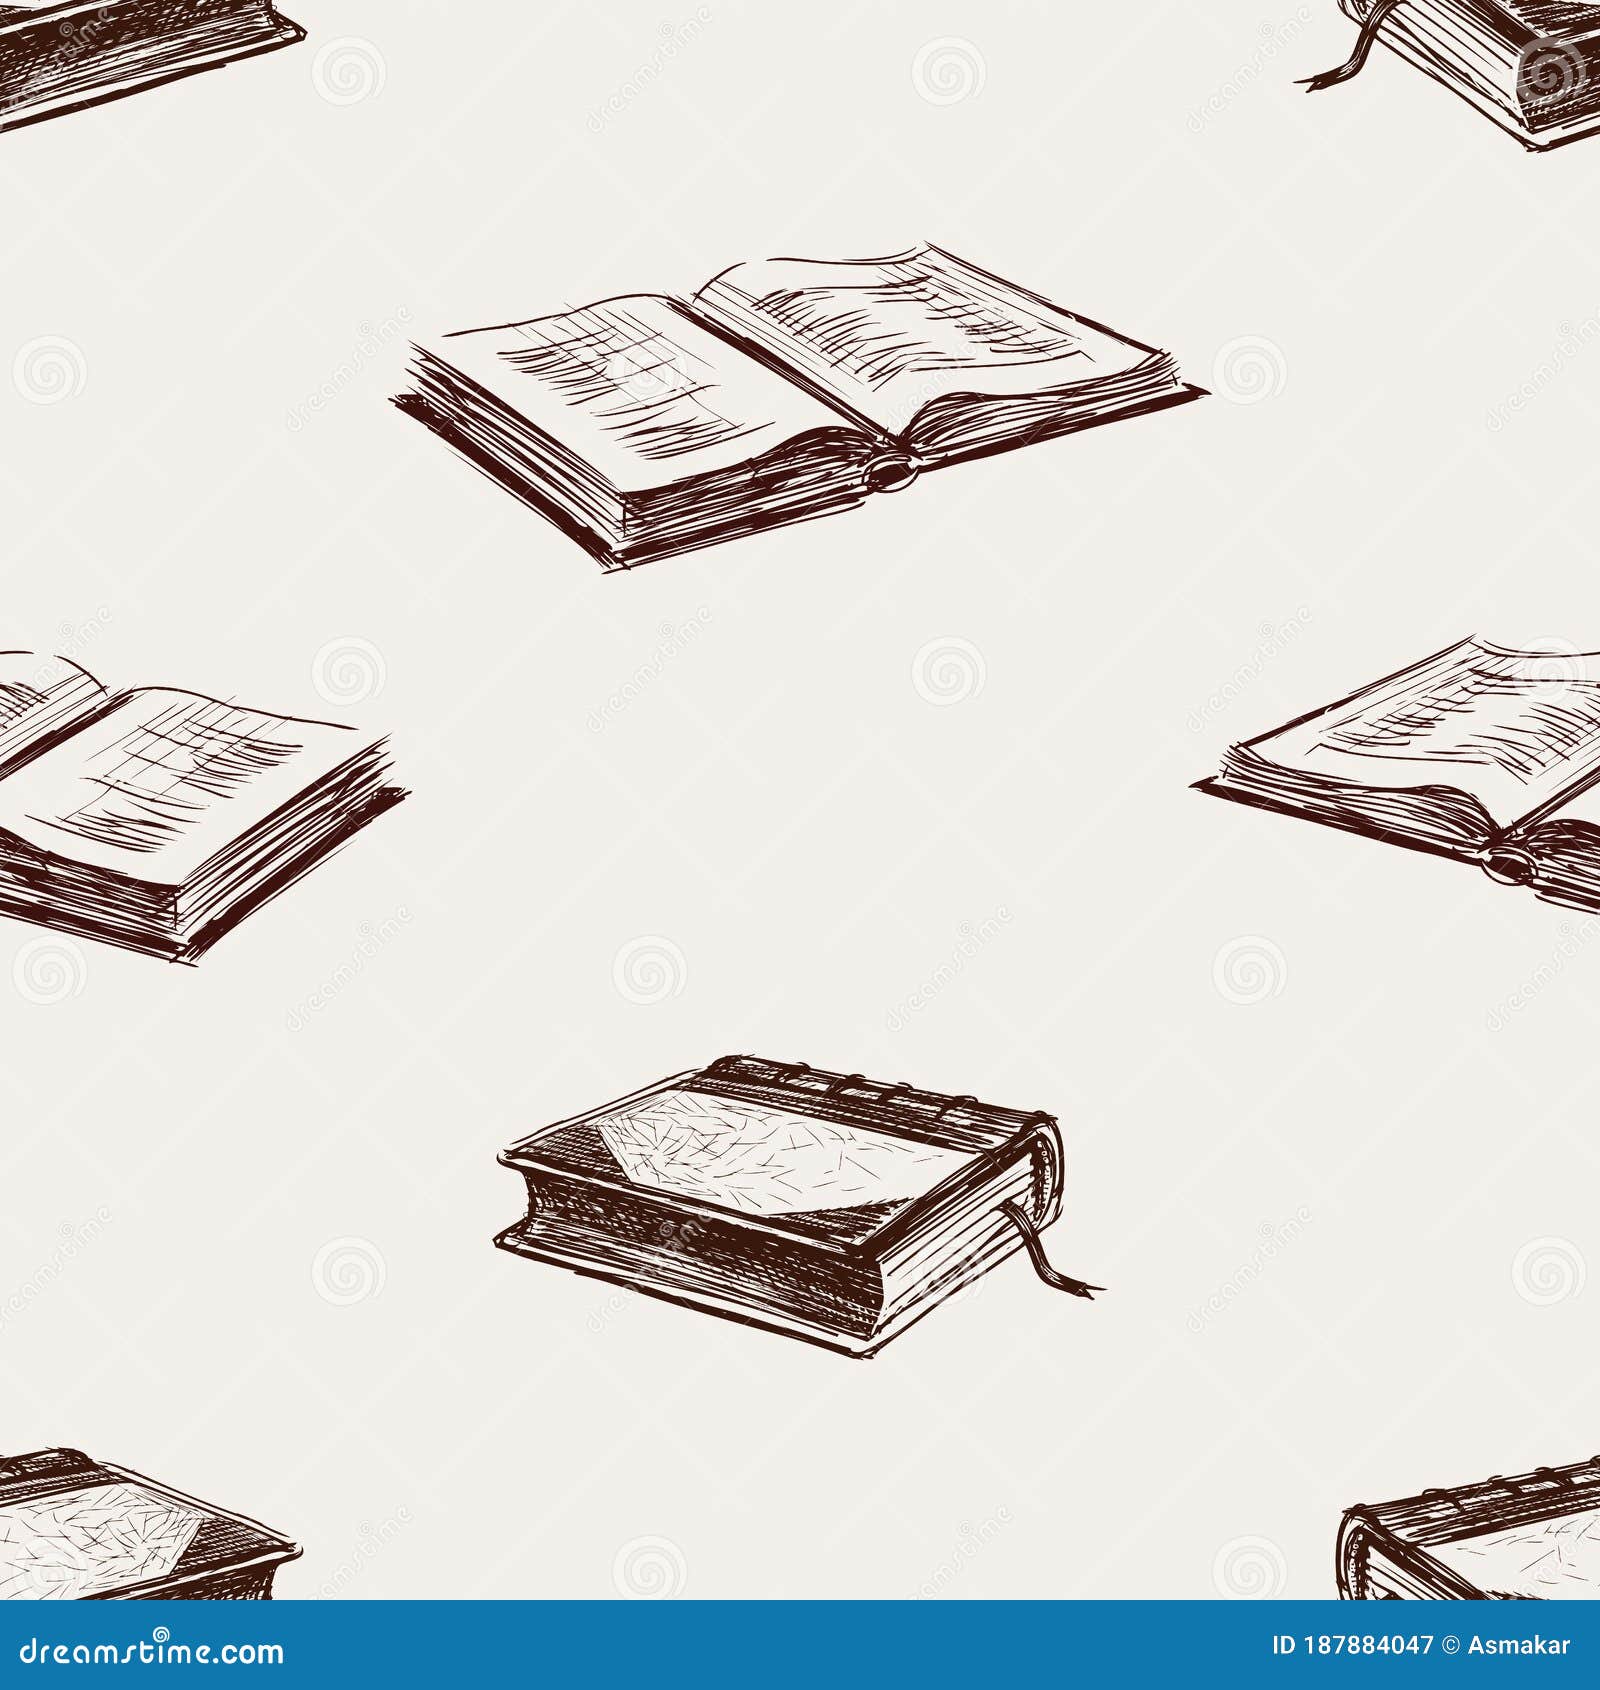 seamless background of sketches old printed books